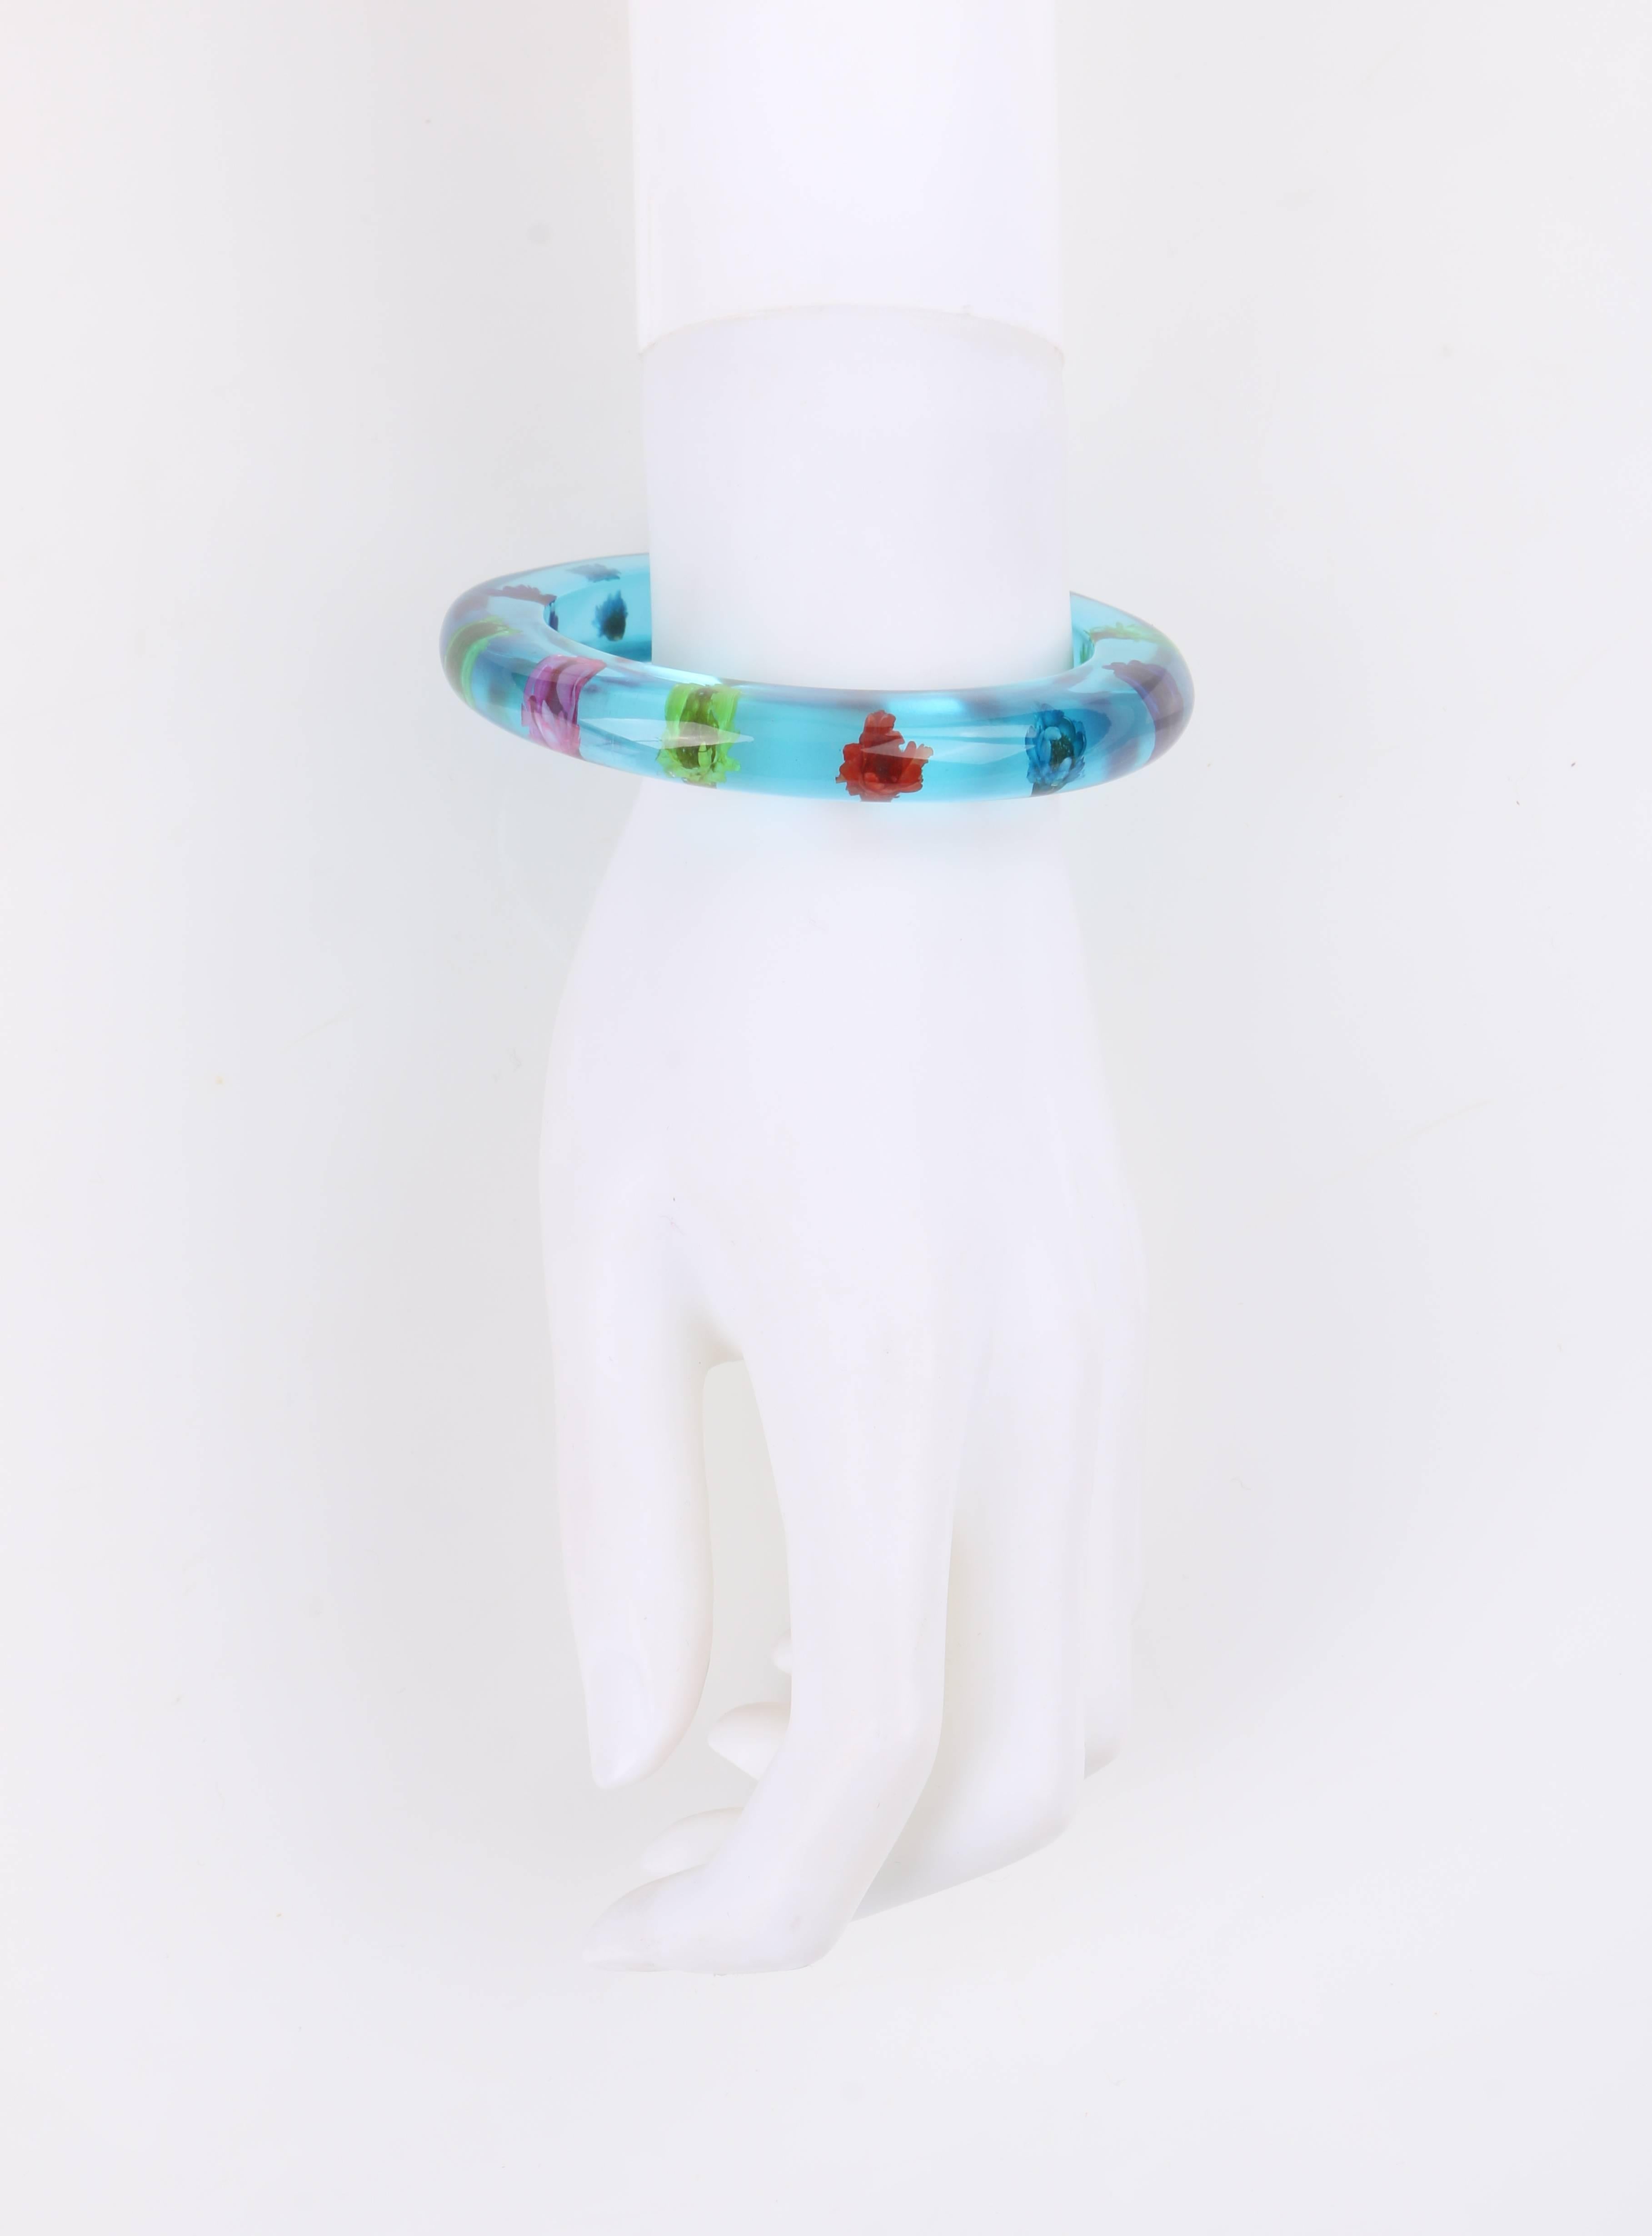 Vintage c.1940's teal blue translucent lucite multi-color flower embedded bangle bracelet. Twelve dried flowers in shades of pink, lime, yellow, red, teal, and blue embedded in teal blue translucent lucite. Circular shape. Slip-on style. Piece is